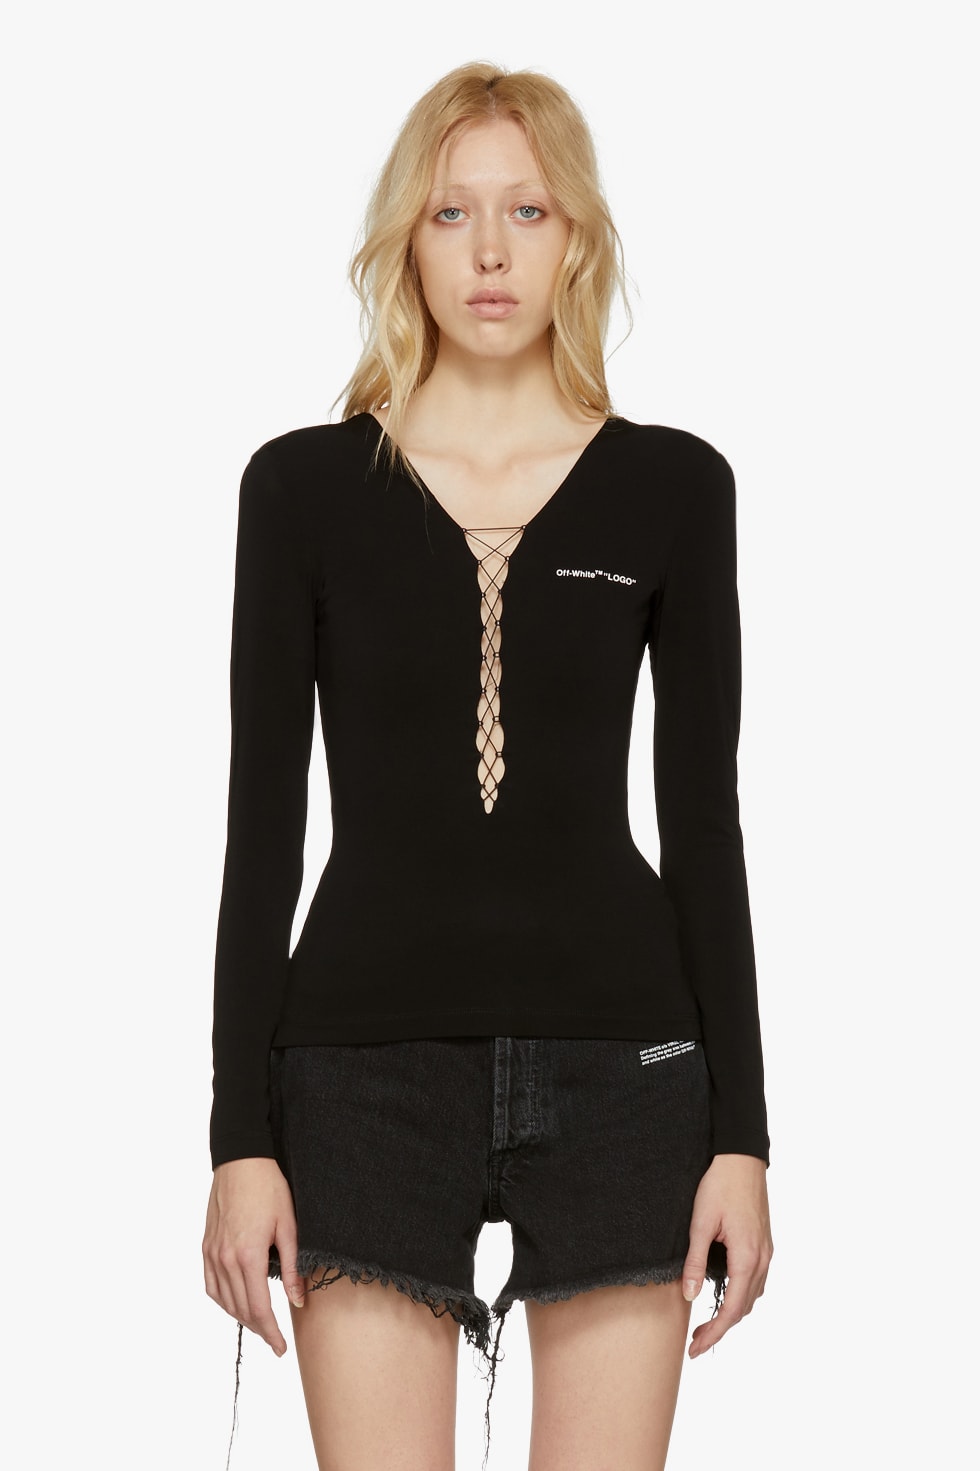 Off-White New Arrivals Spring Collection Lace Up Body Suit